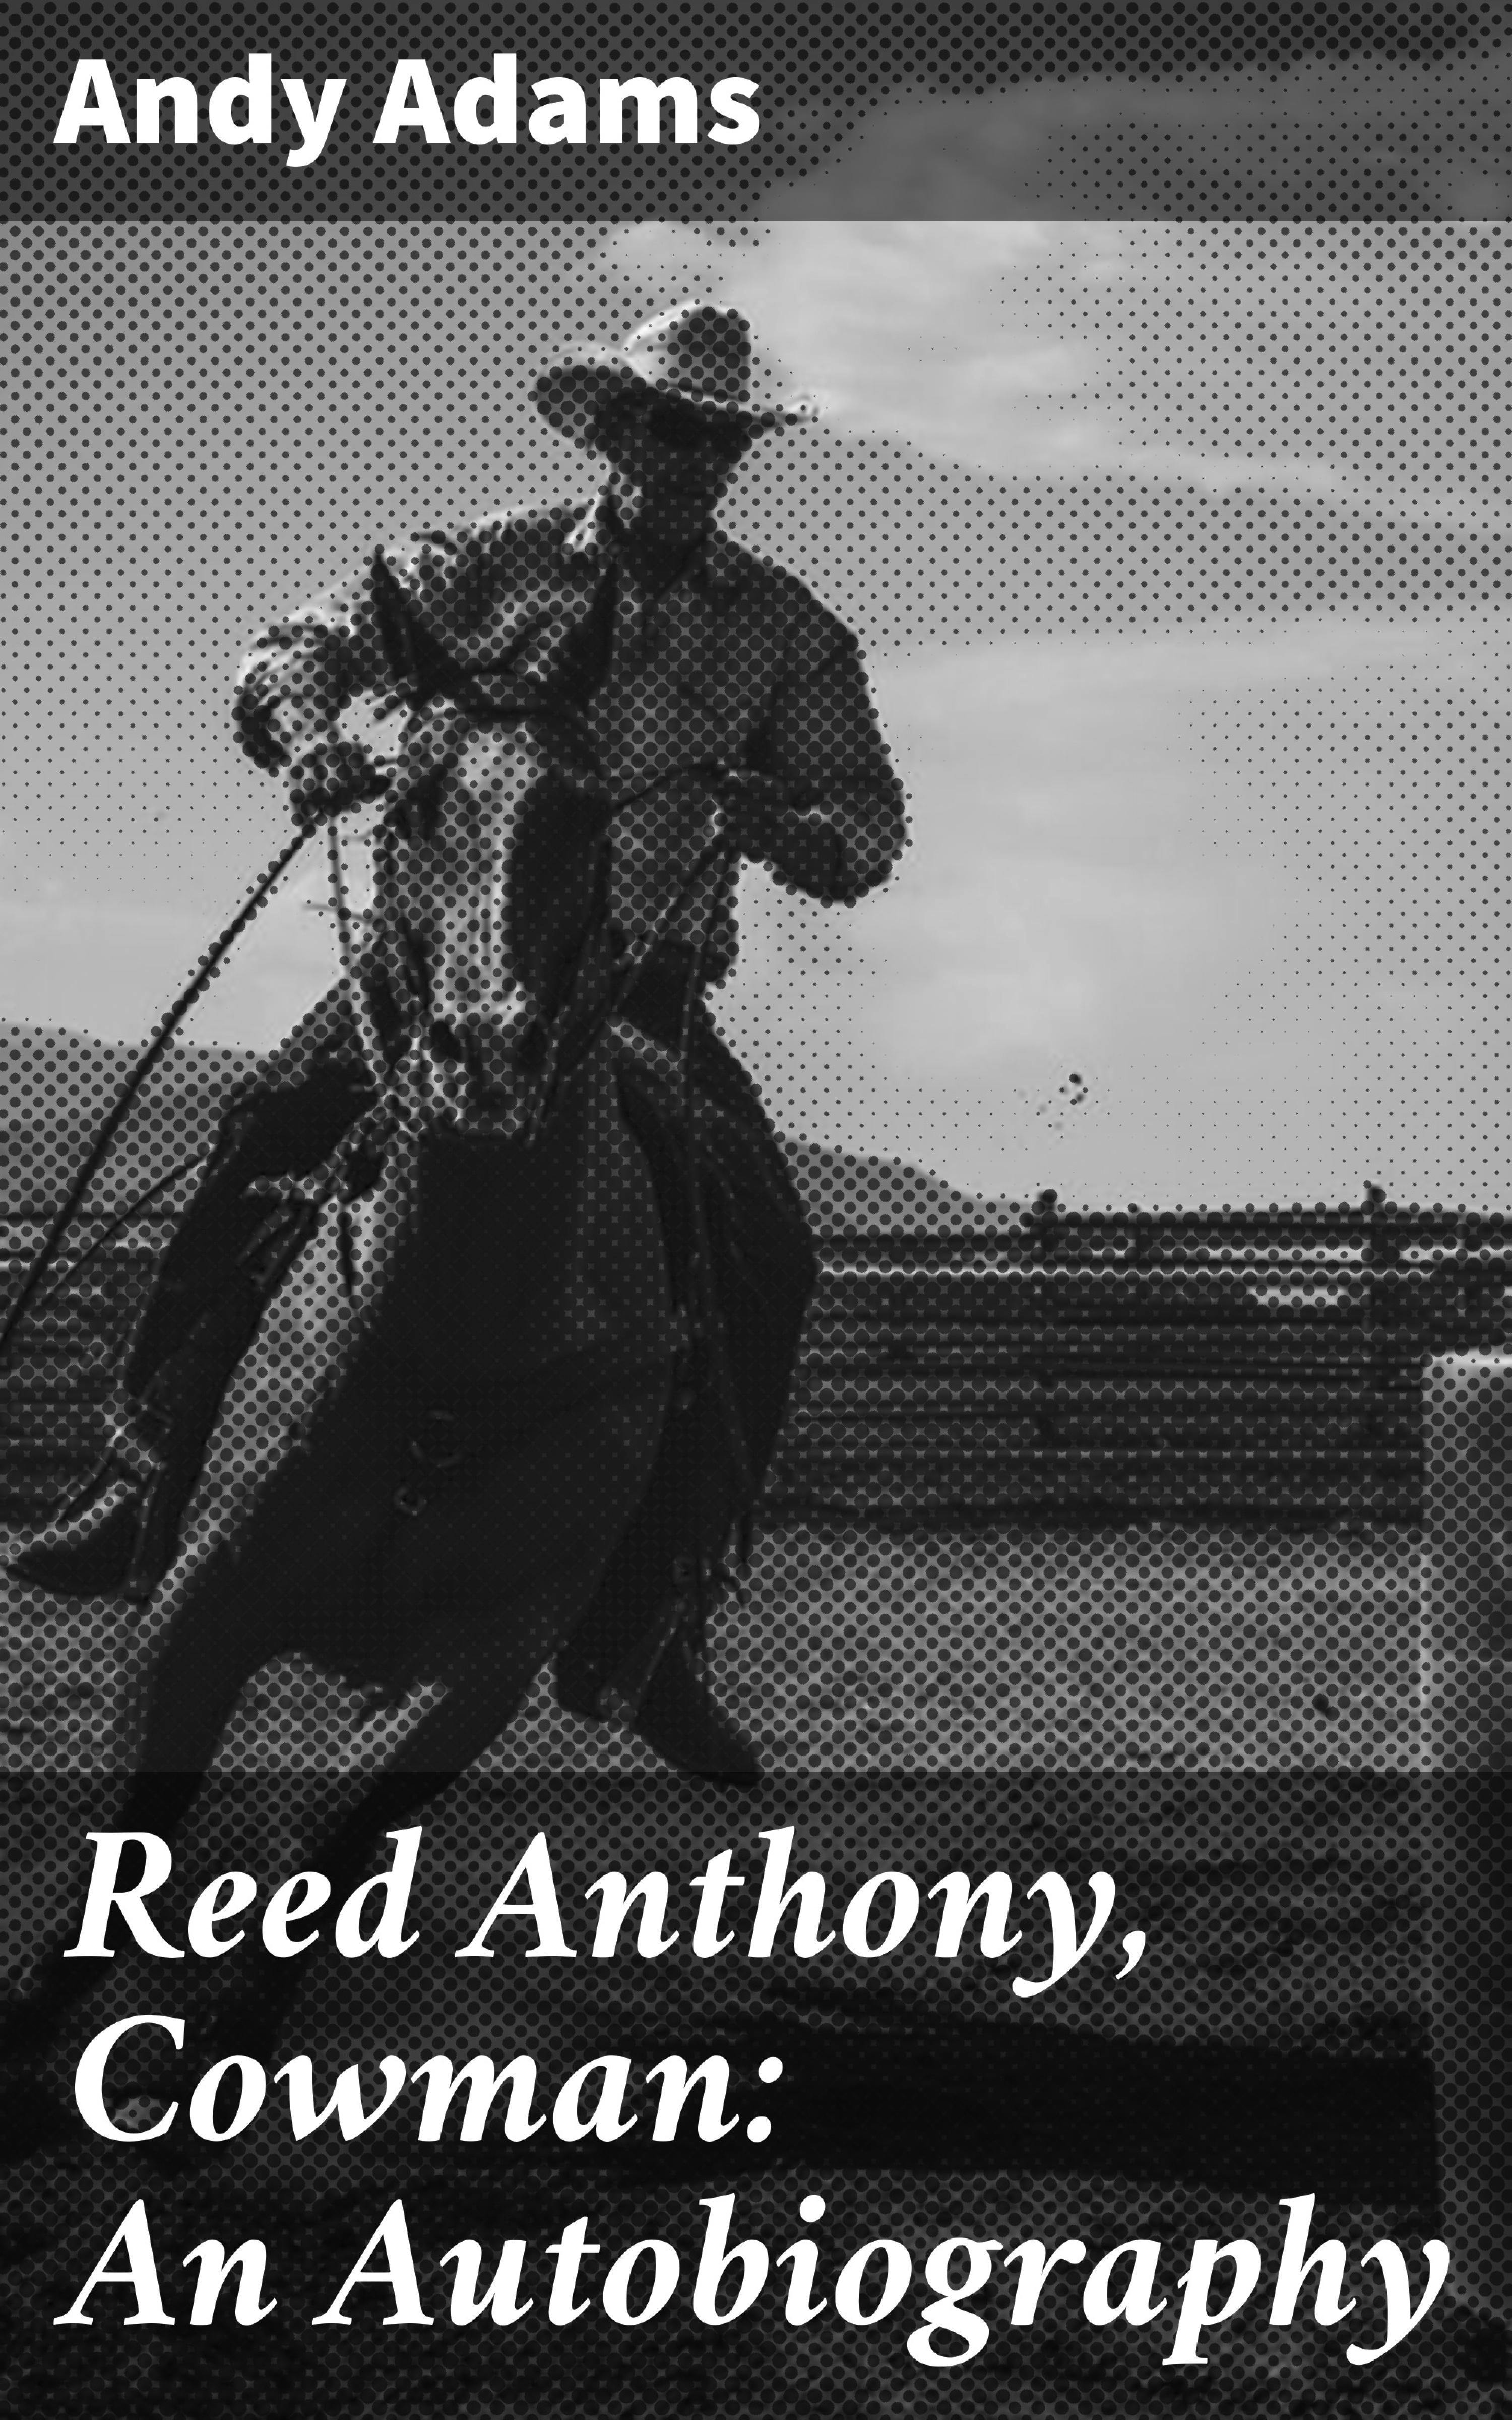 Reed Anthony, Cowman: An Autobiography - Andy Adams